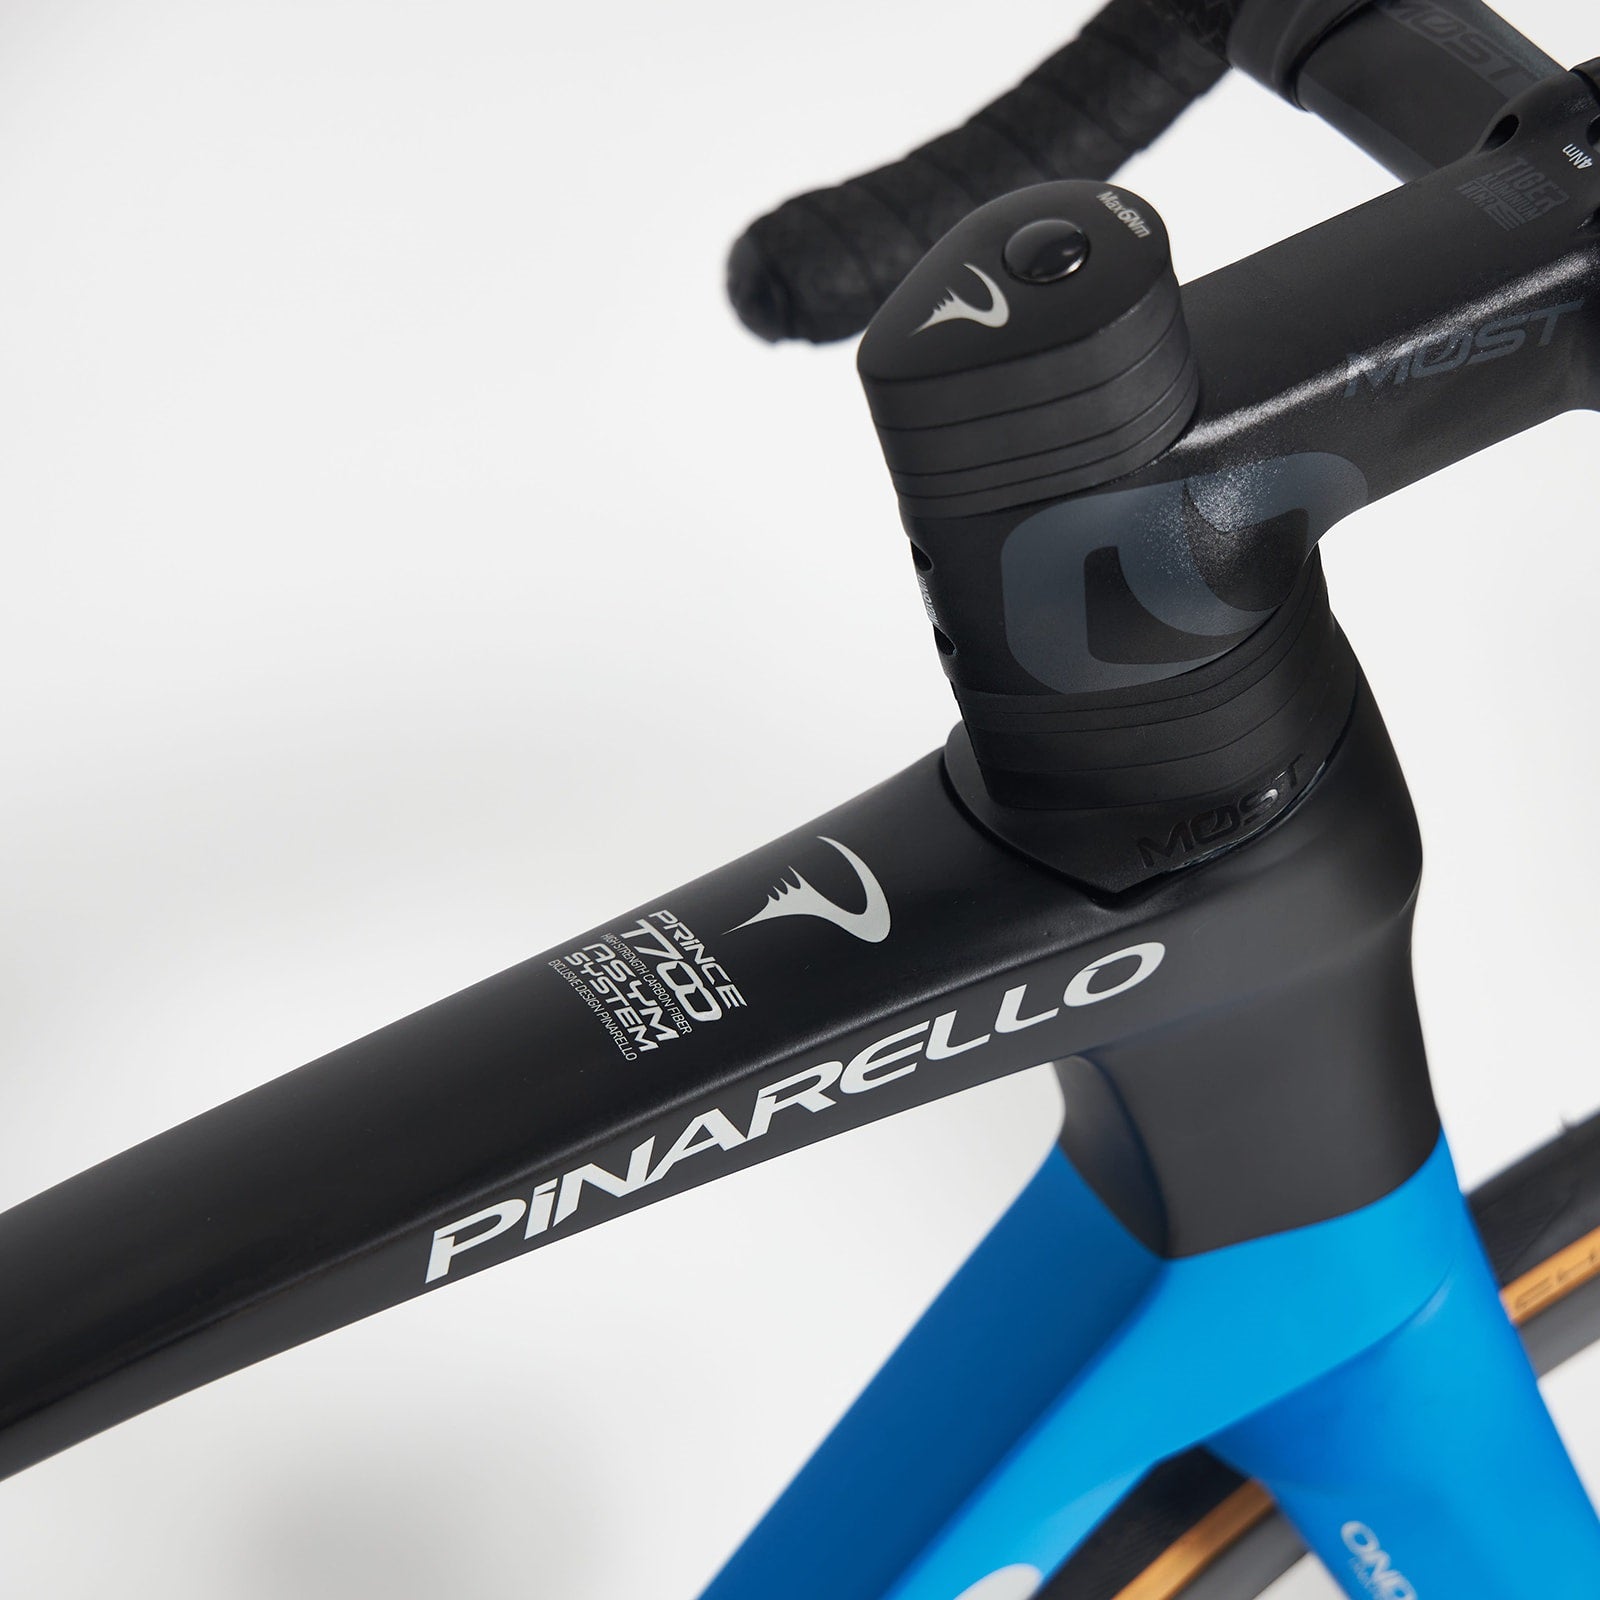 Pinarello replaces Prince with new F-Series race bikes – a baby